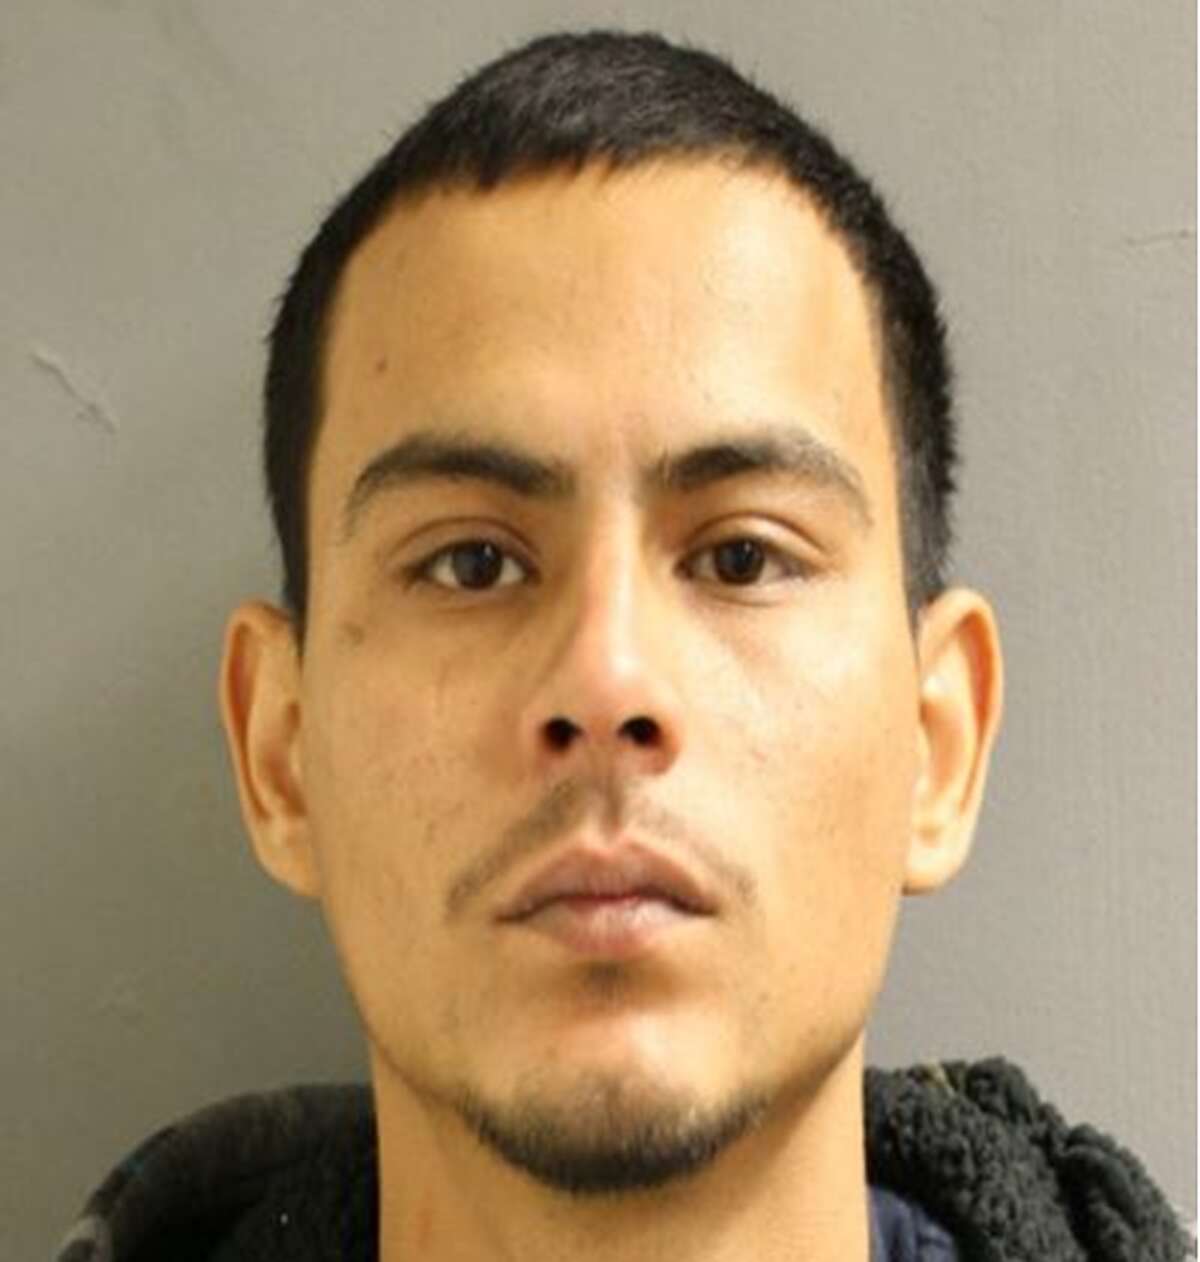 Martin Vela, 26, has been charged with murder in the shooting death of Arnoldo Moreno on May 14, 2019.